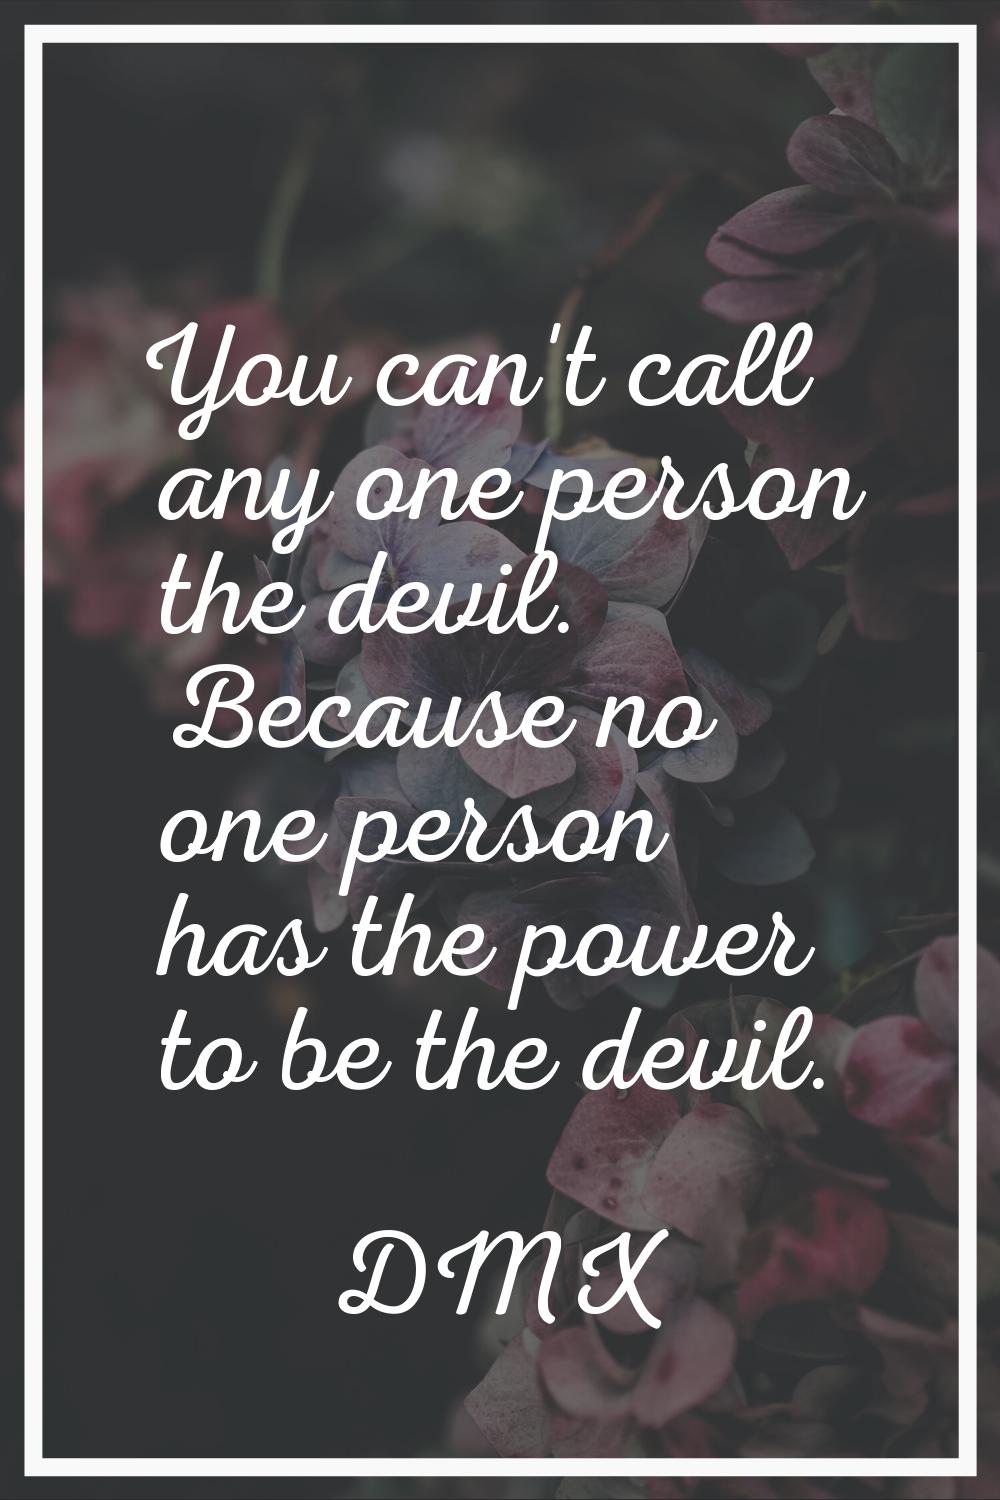 You can't call any one person the devil. Because no one person has the power to be the devil.